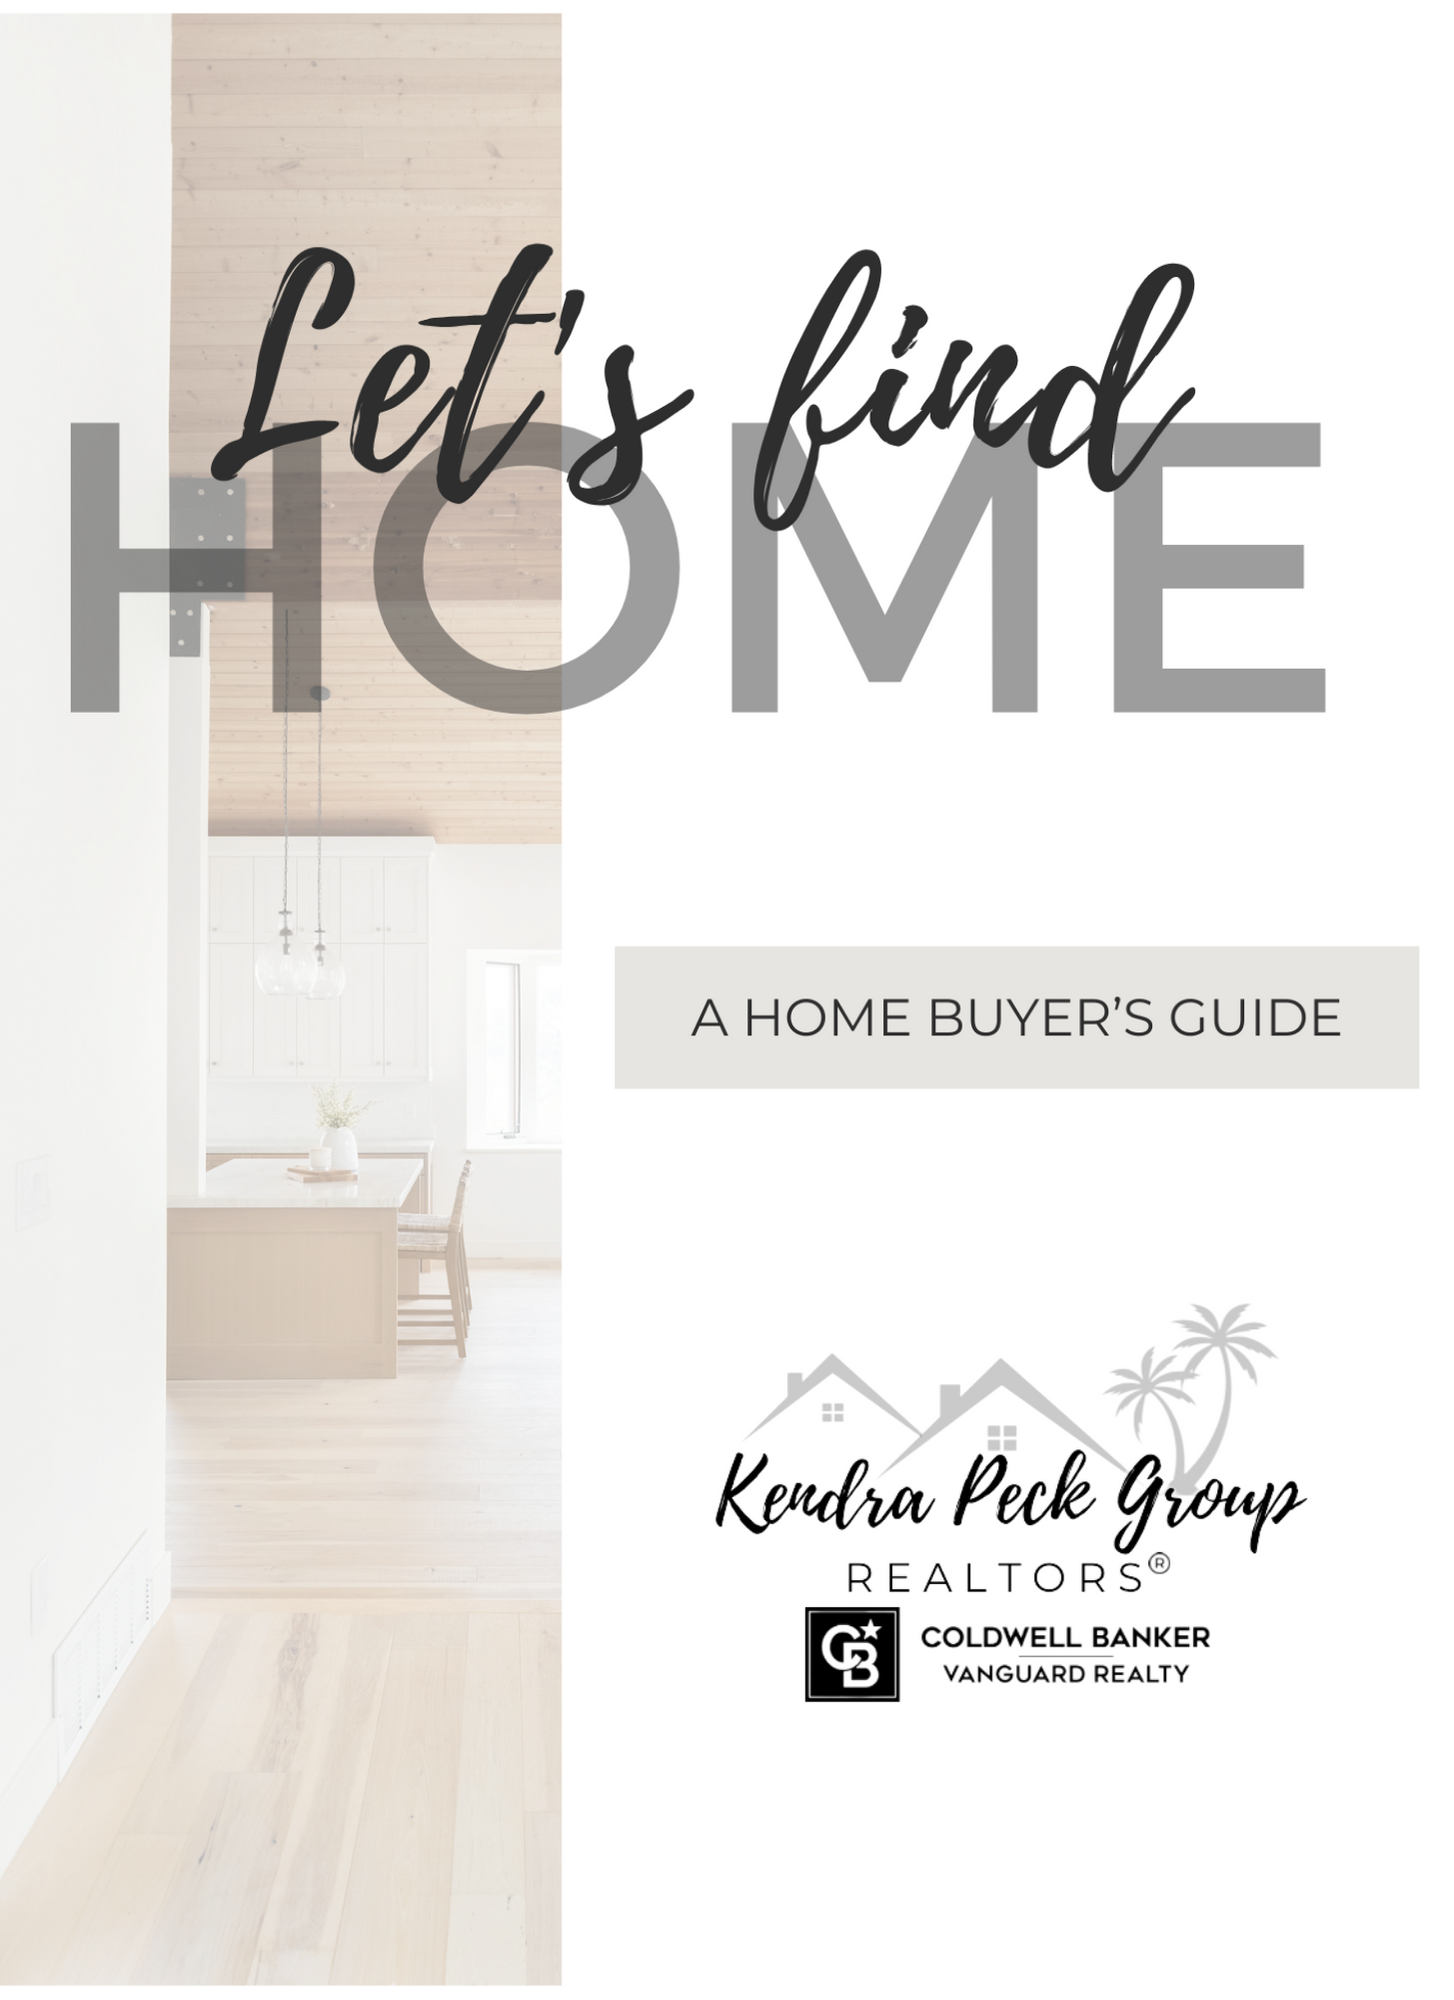 Kendra Peck Group Realtors Home Buyer's Guide